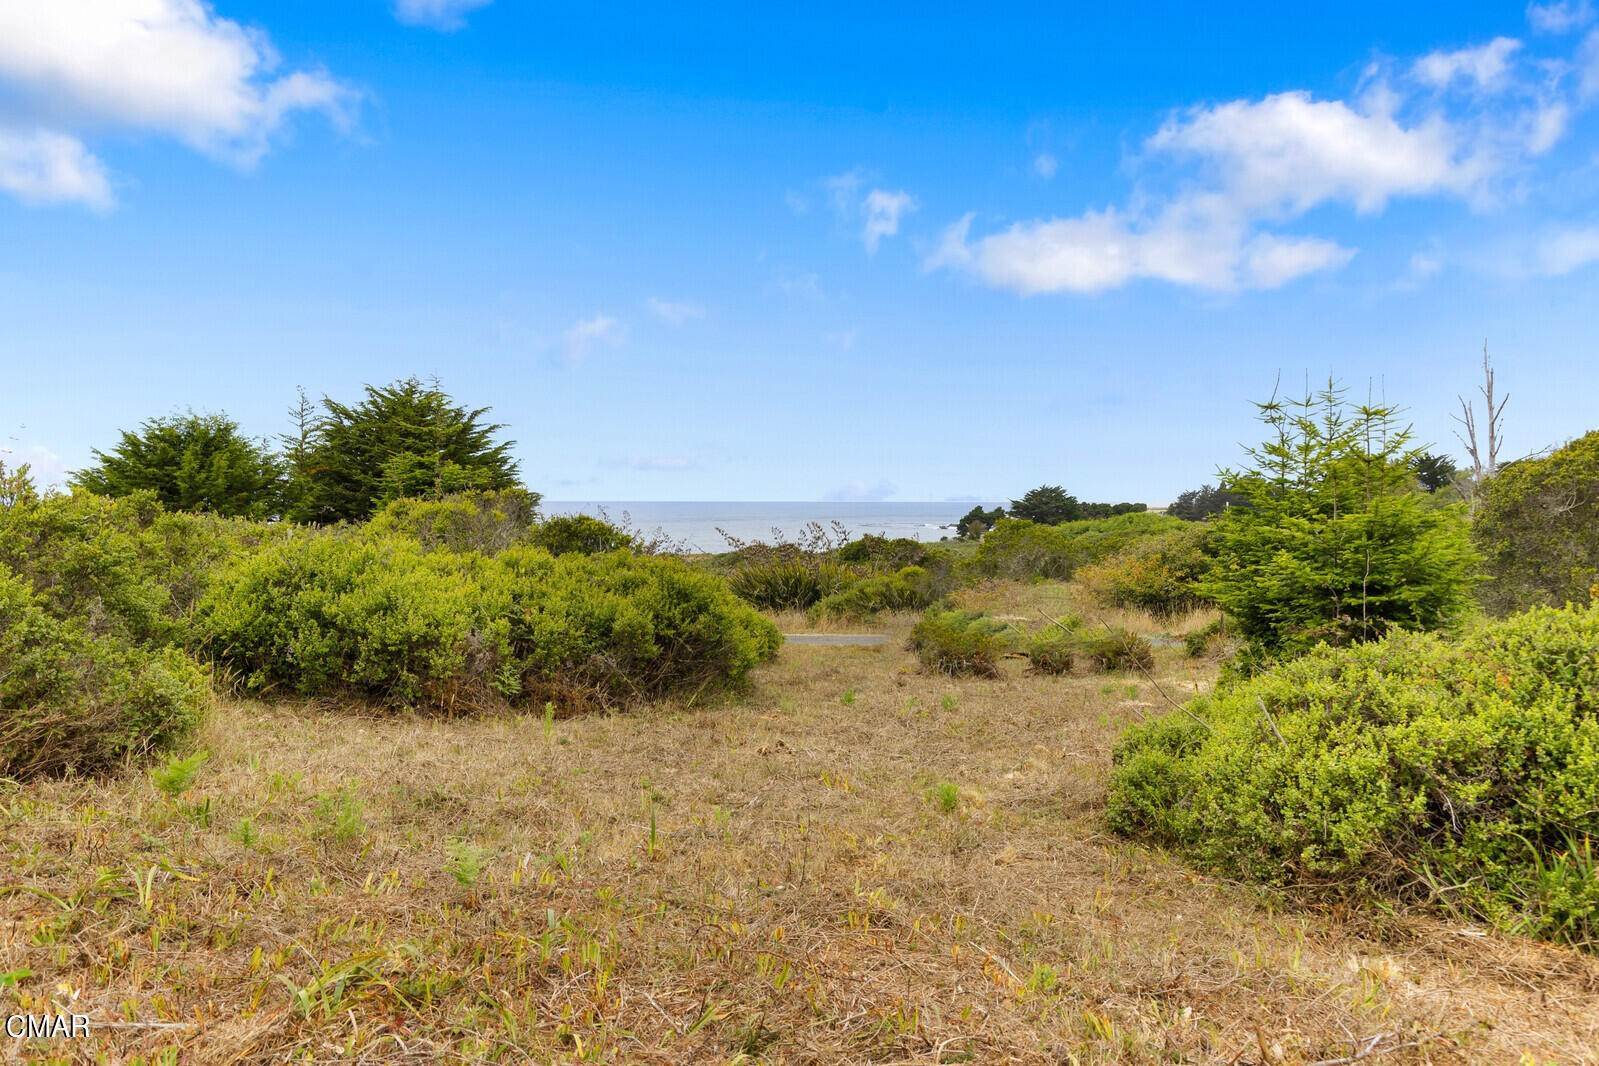 7. Acreage for Sale at Drifters Reef Road Mendocino, California 95460 United States